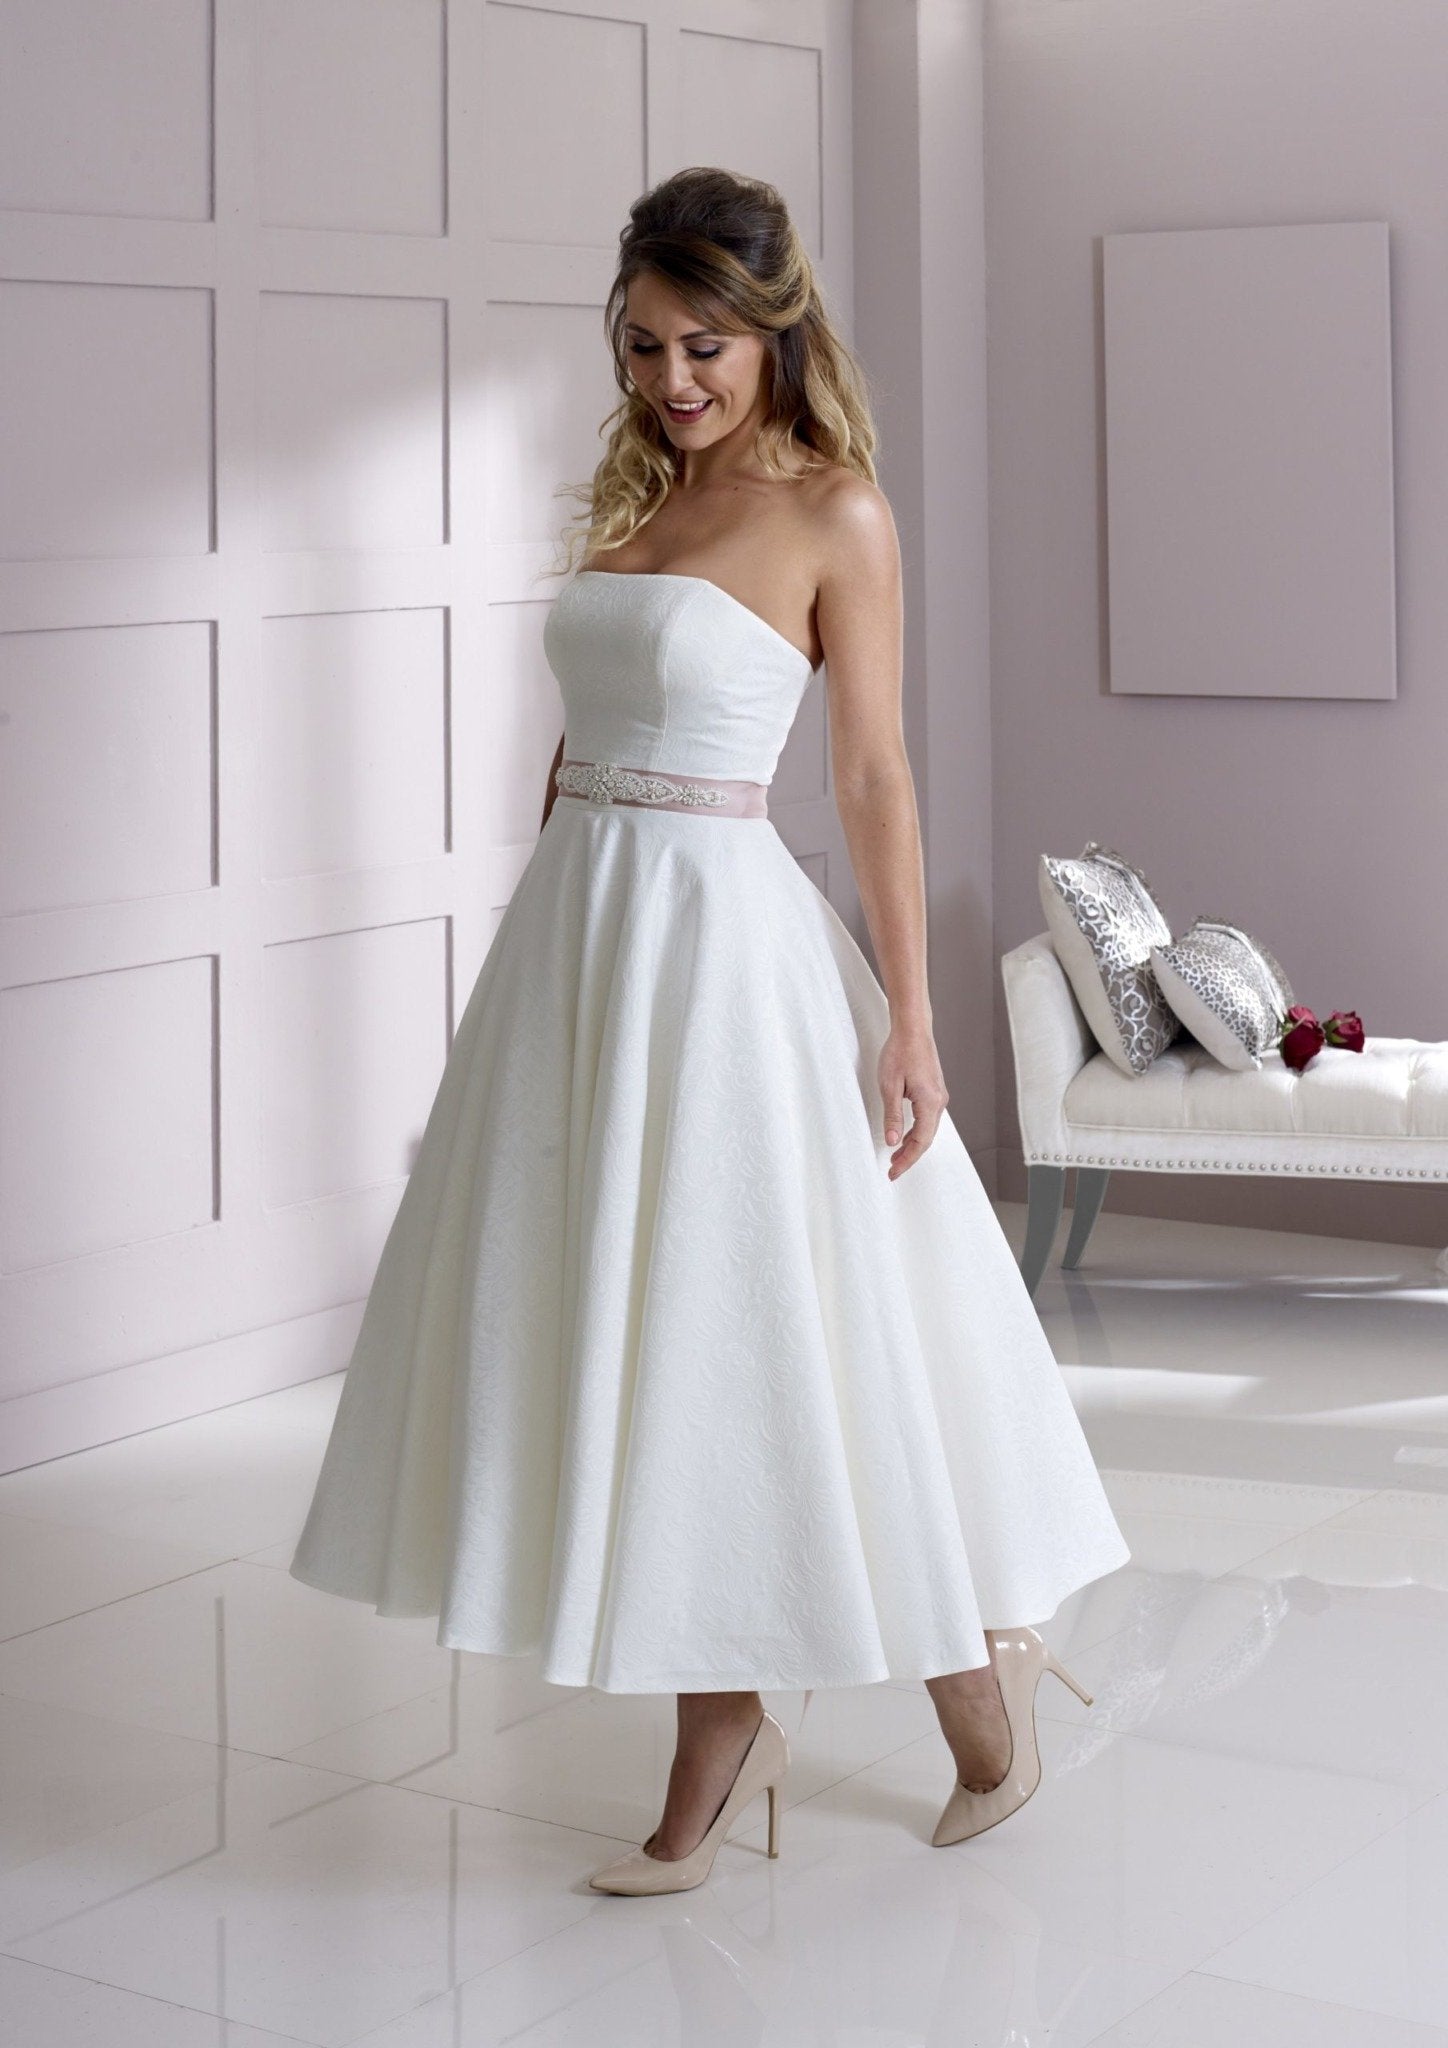 Plunging V-Neck Bridal Gown with Tulle Handkerchief Skirt by